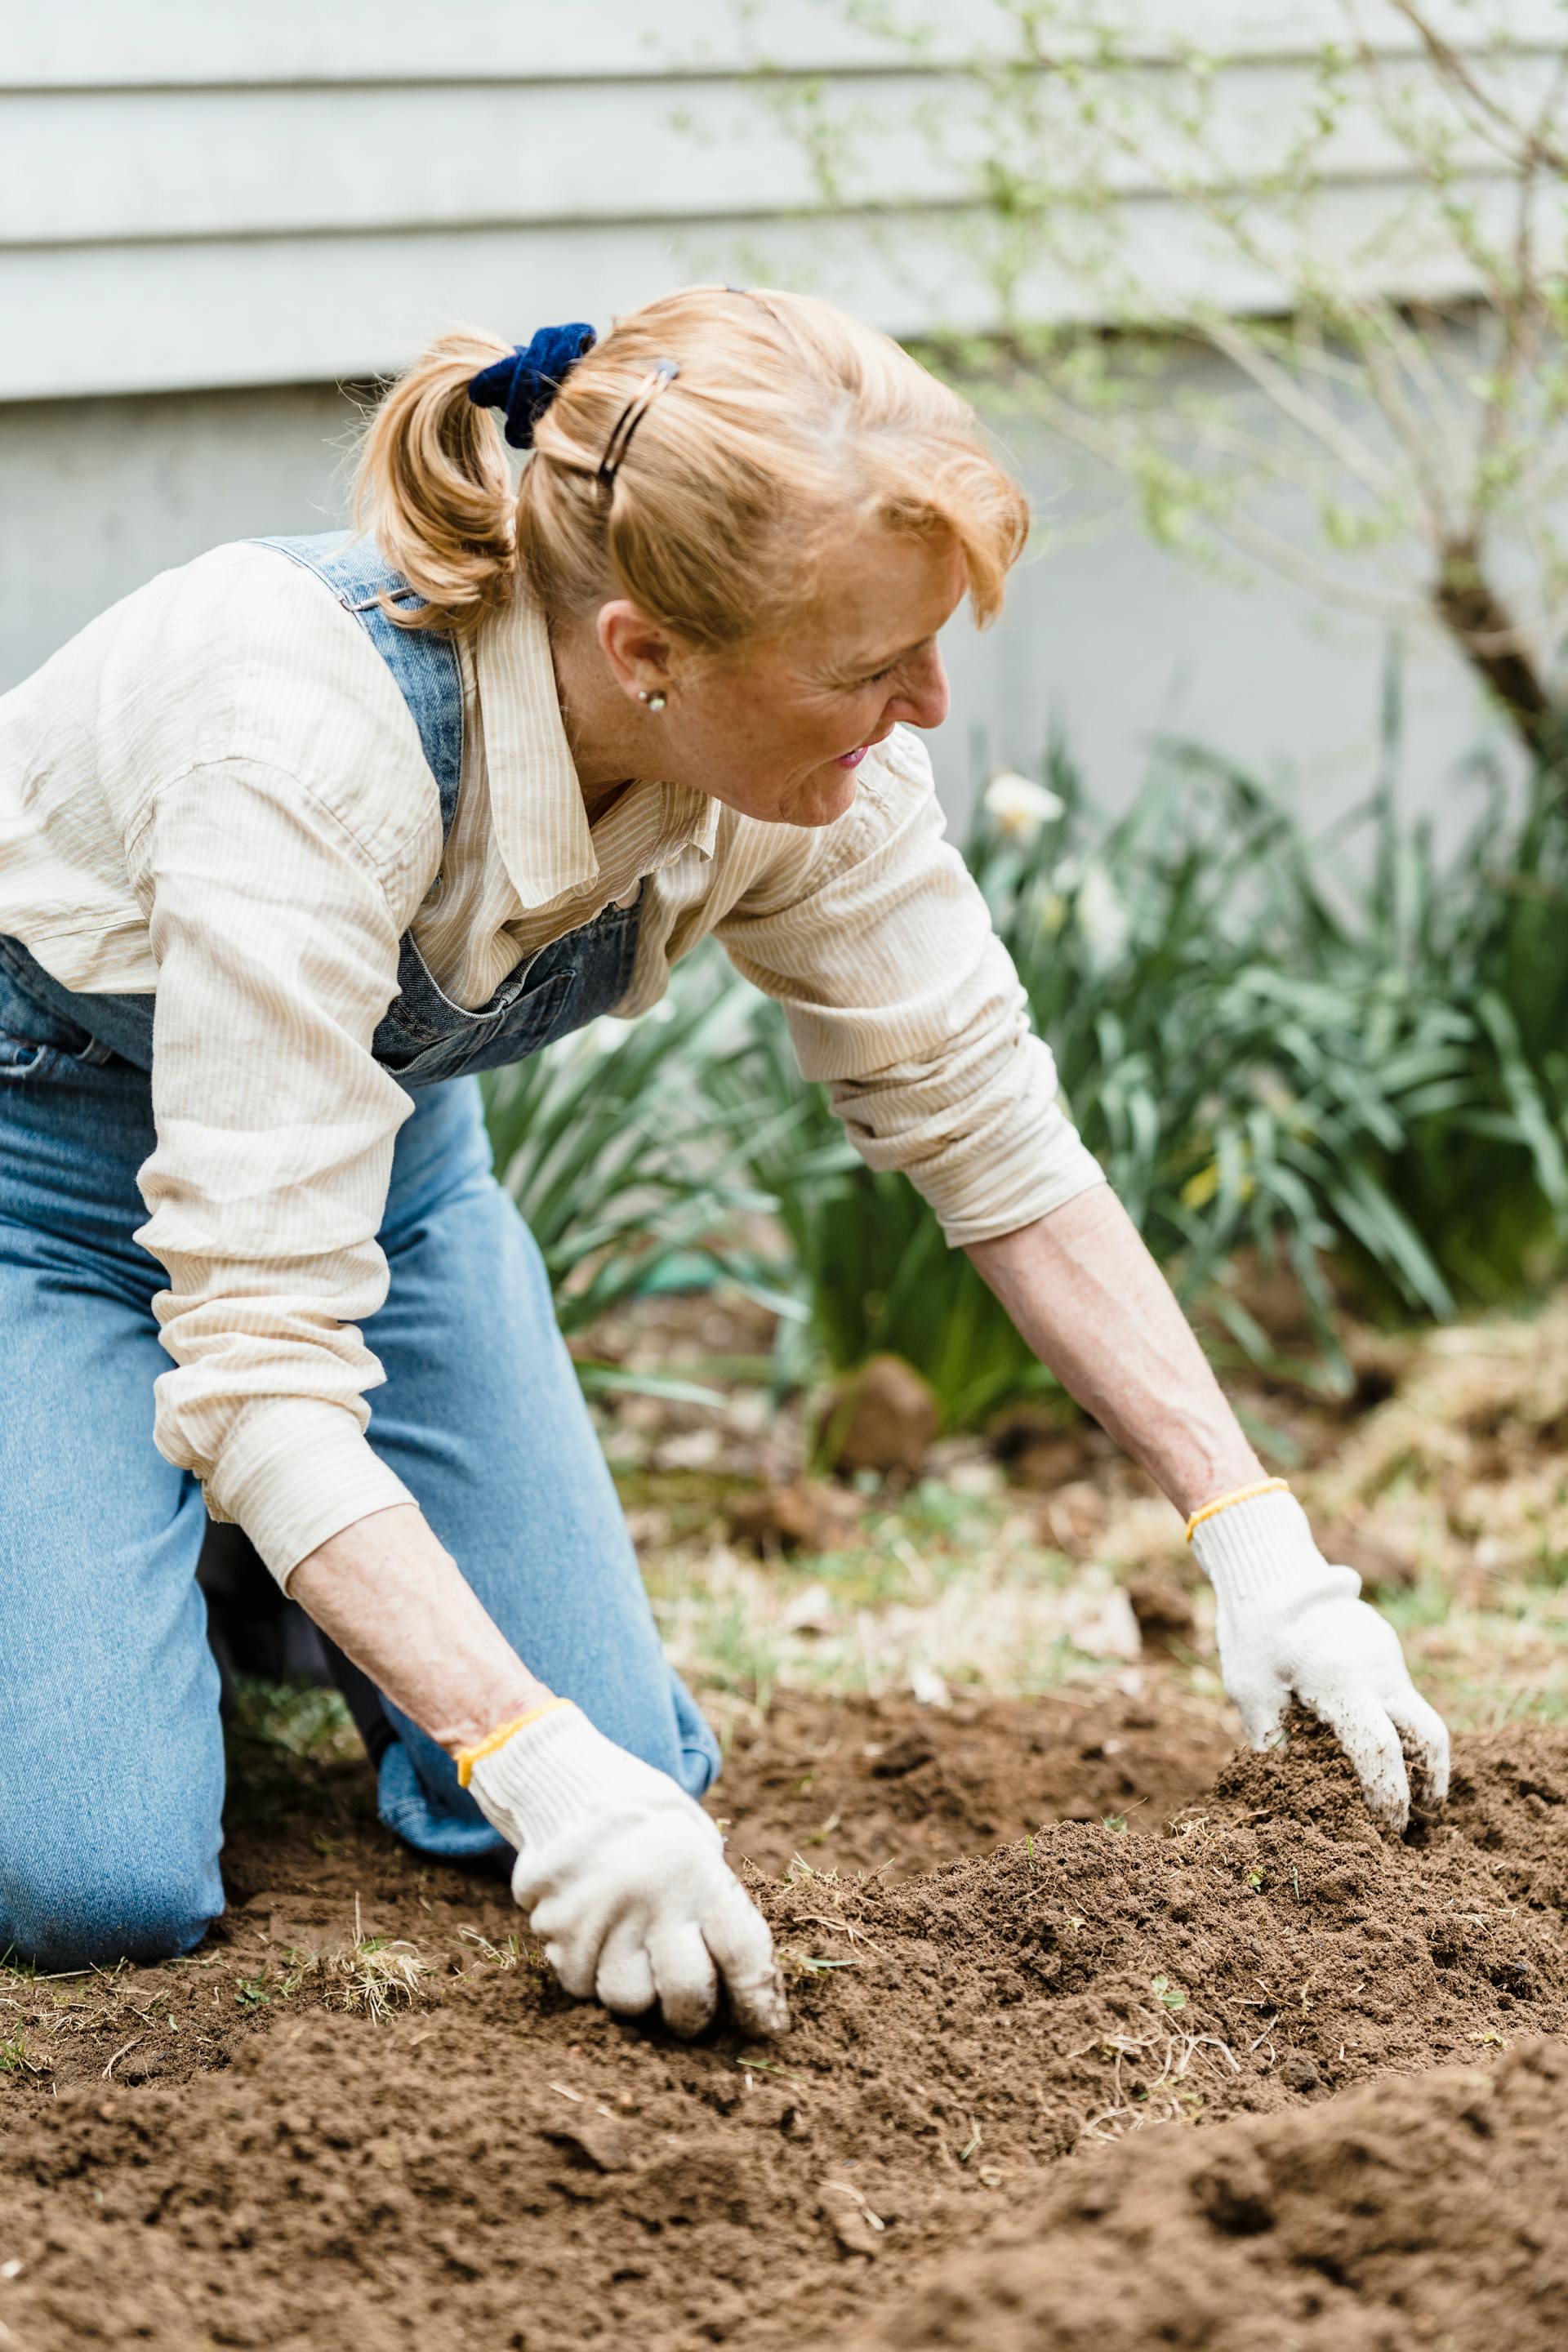 A mature woman in the garden | Source: Pexels